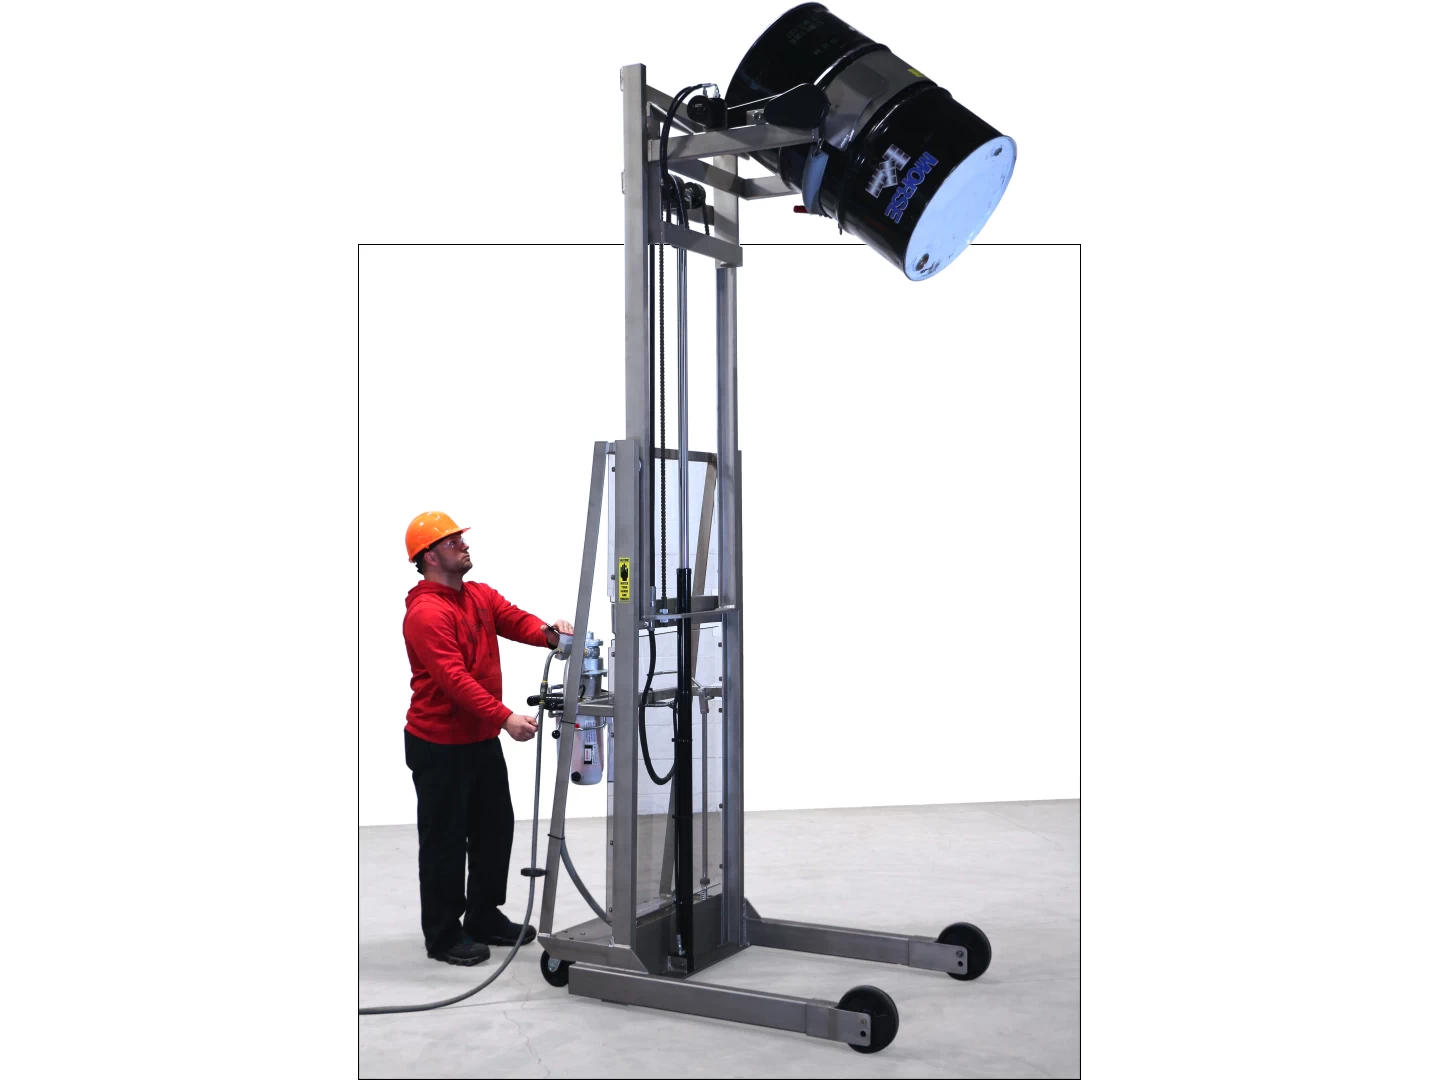 Stainless Steel Vertical-Lift Drum Pourer with Air Power Lift and Tilt Control - Model 520SS-114